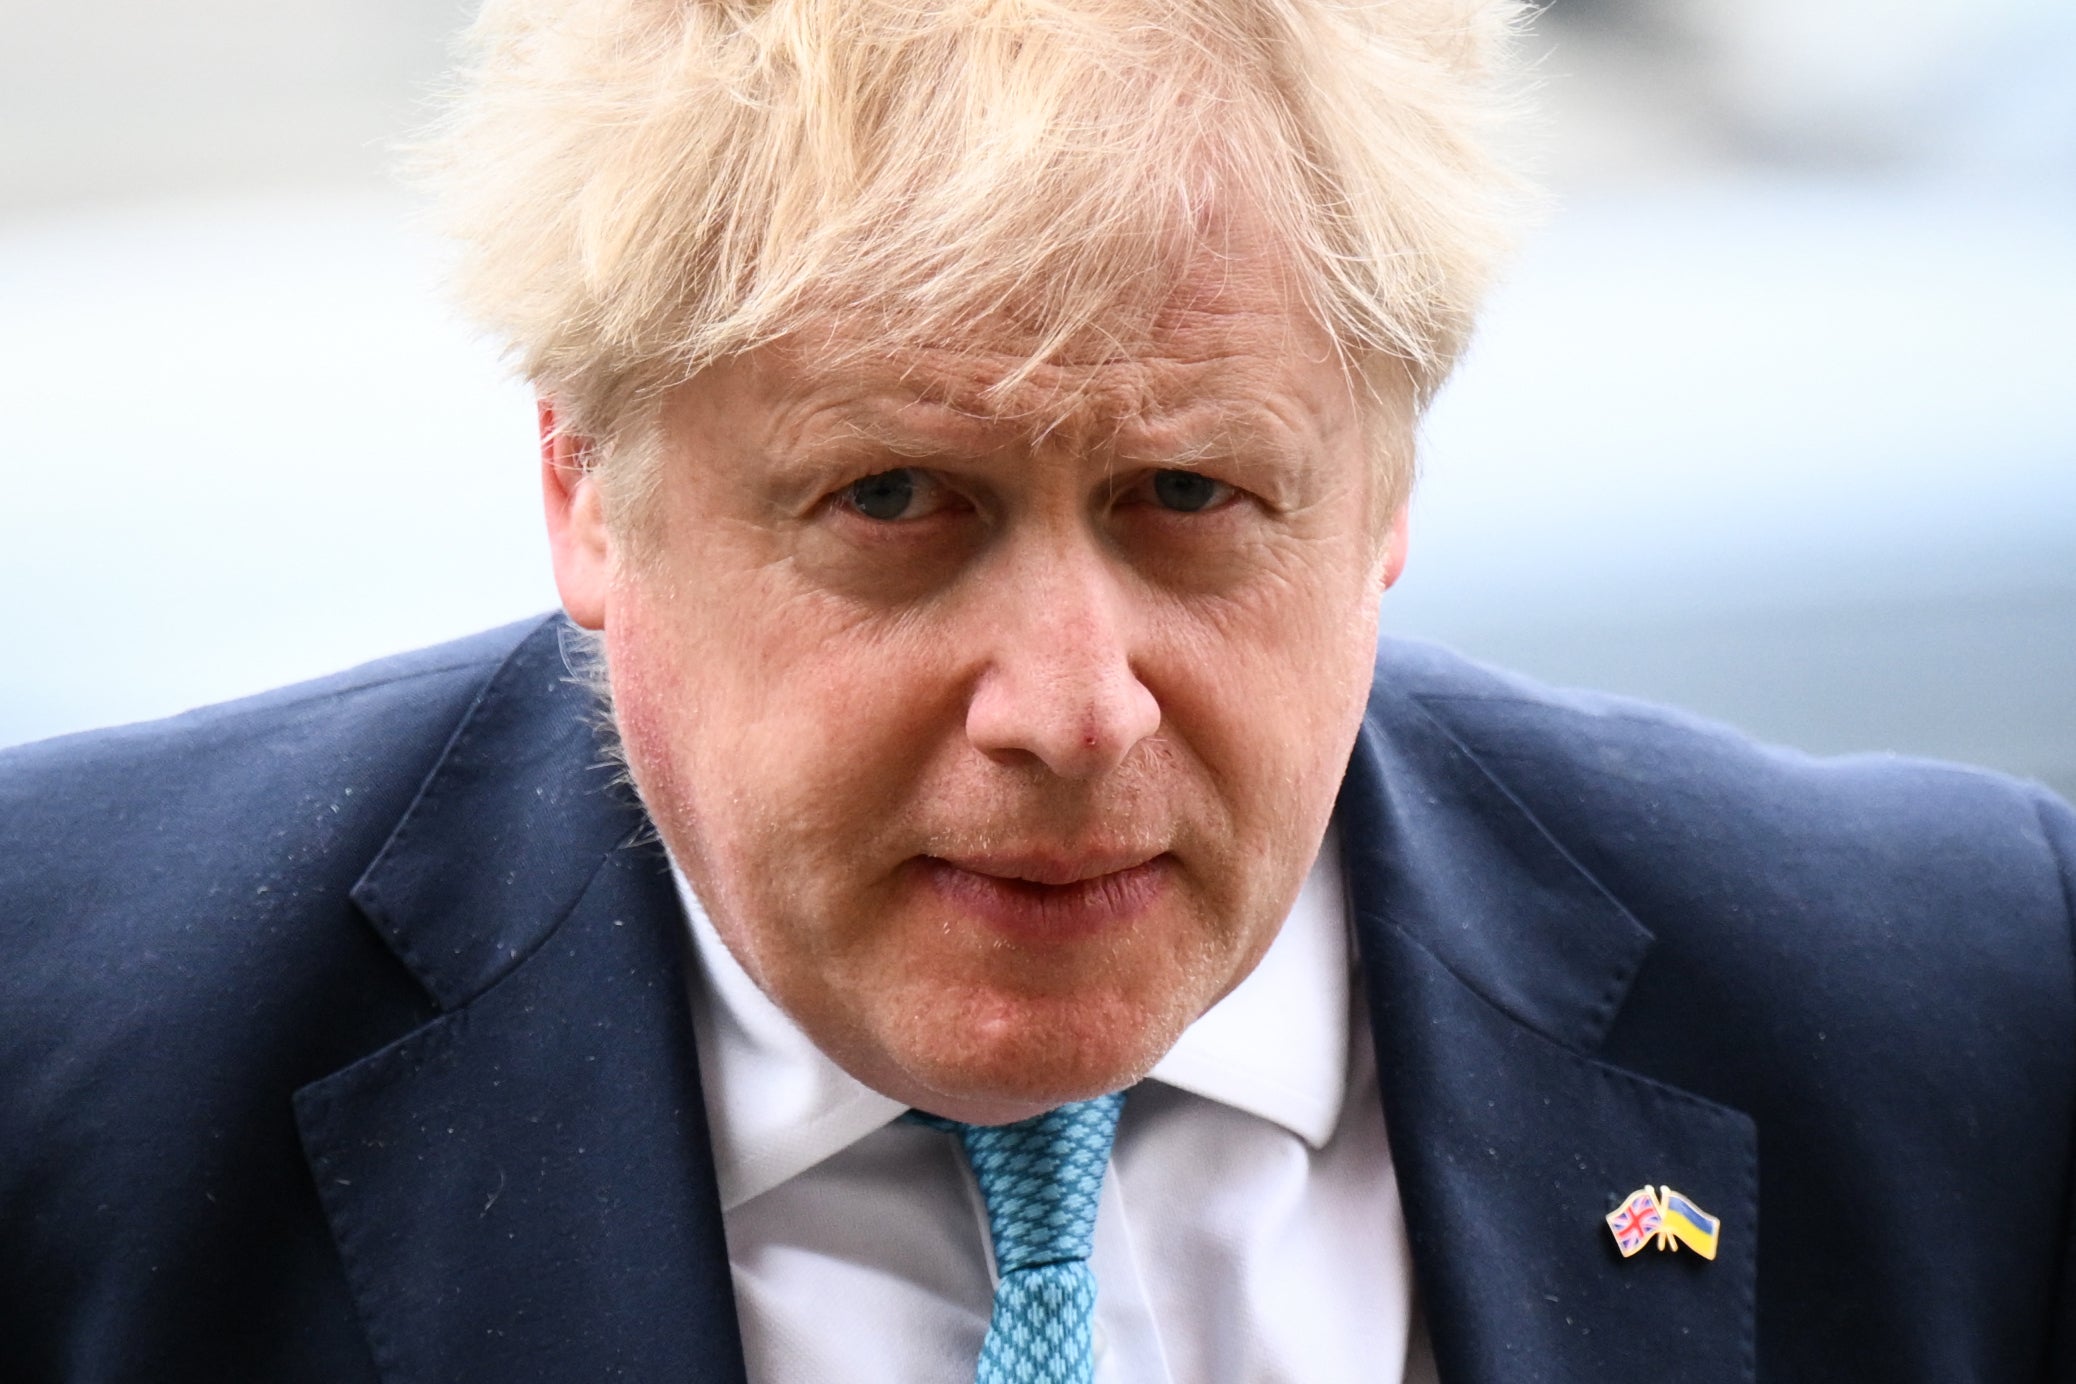 Just as the 2019 Conservative manifesto was going to print, a new line was added – that ‘overall numbers would fall’. Johnson reportedly told colleagues to ignore this